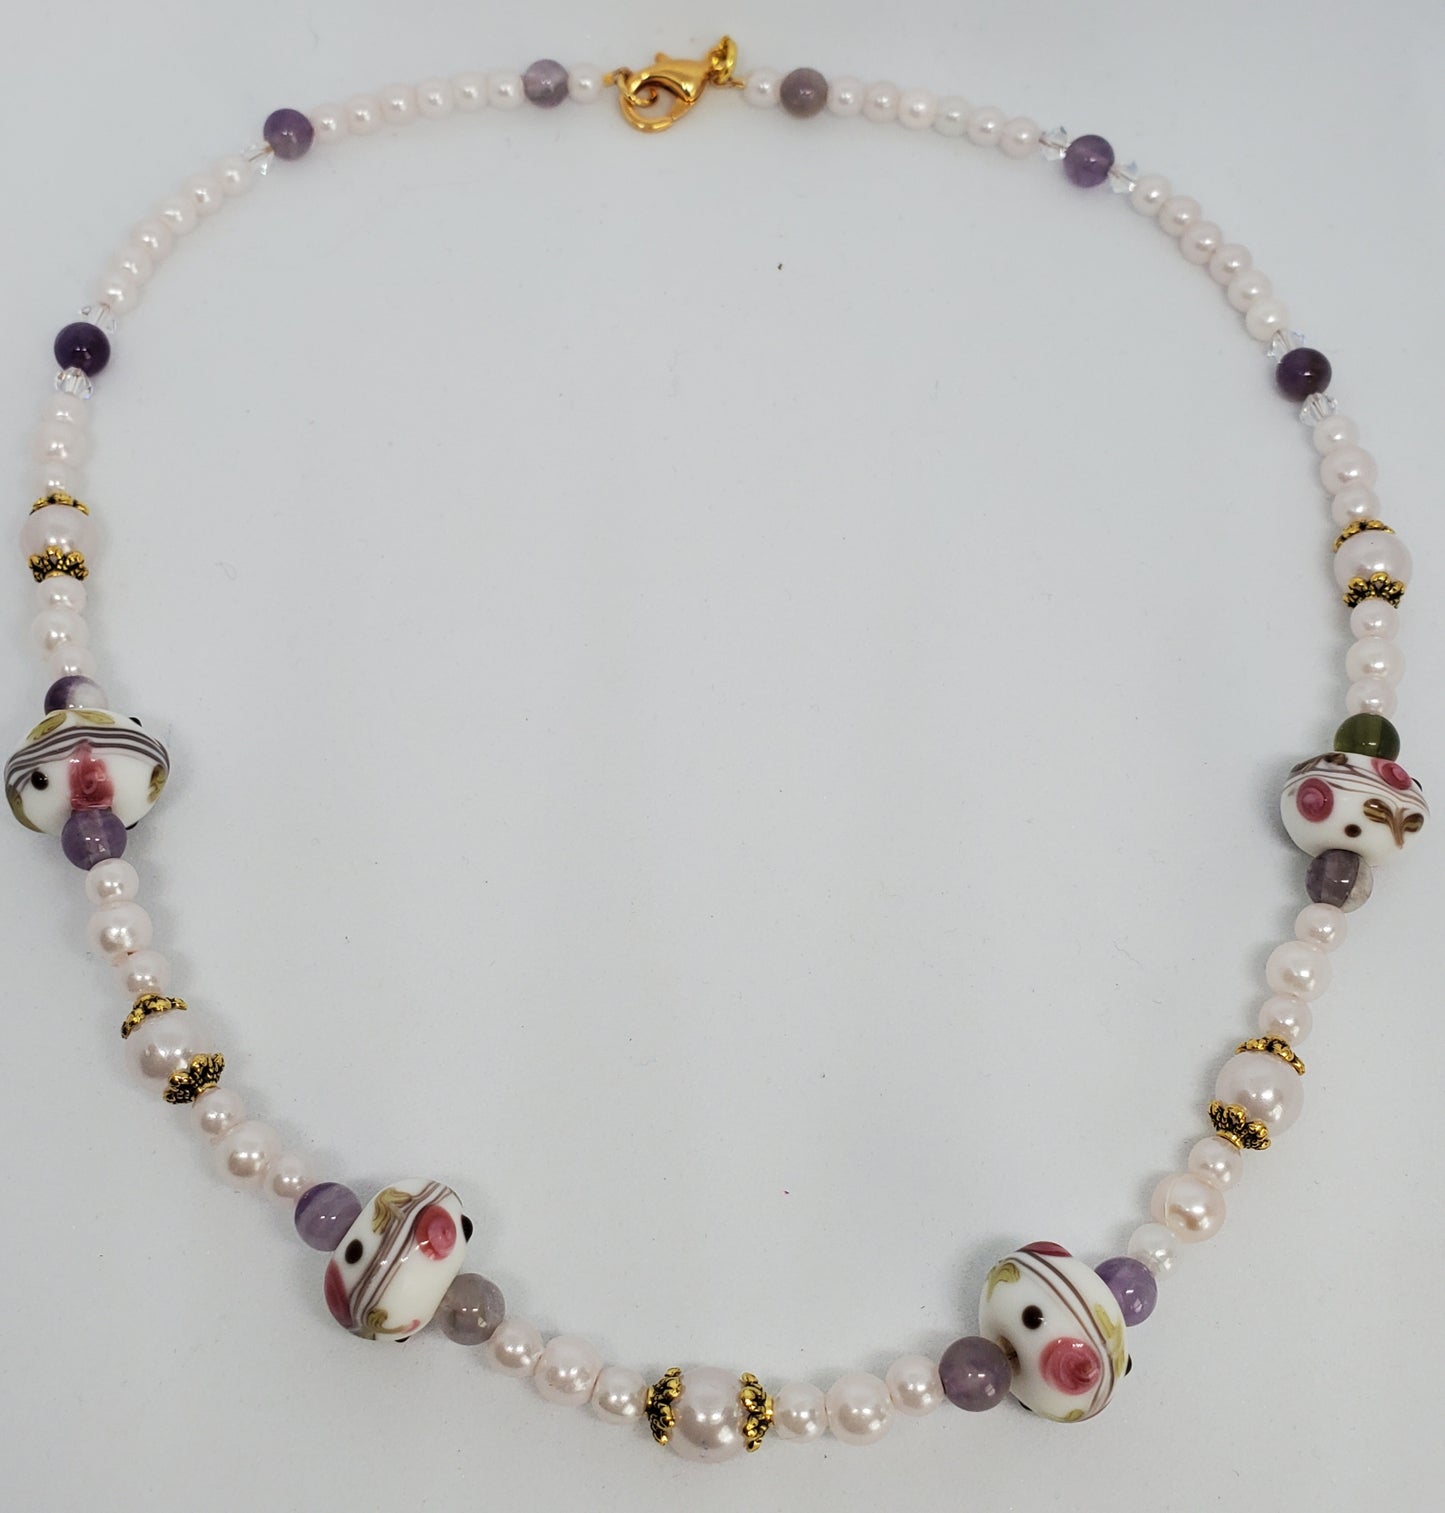 Amethyst and Pearl Lampwork Necklace